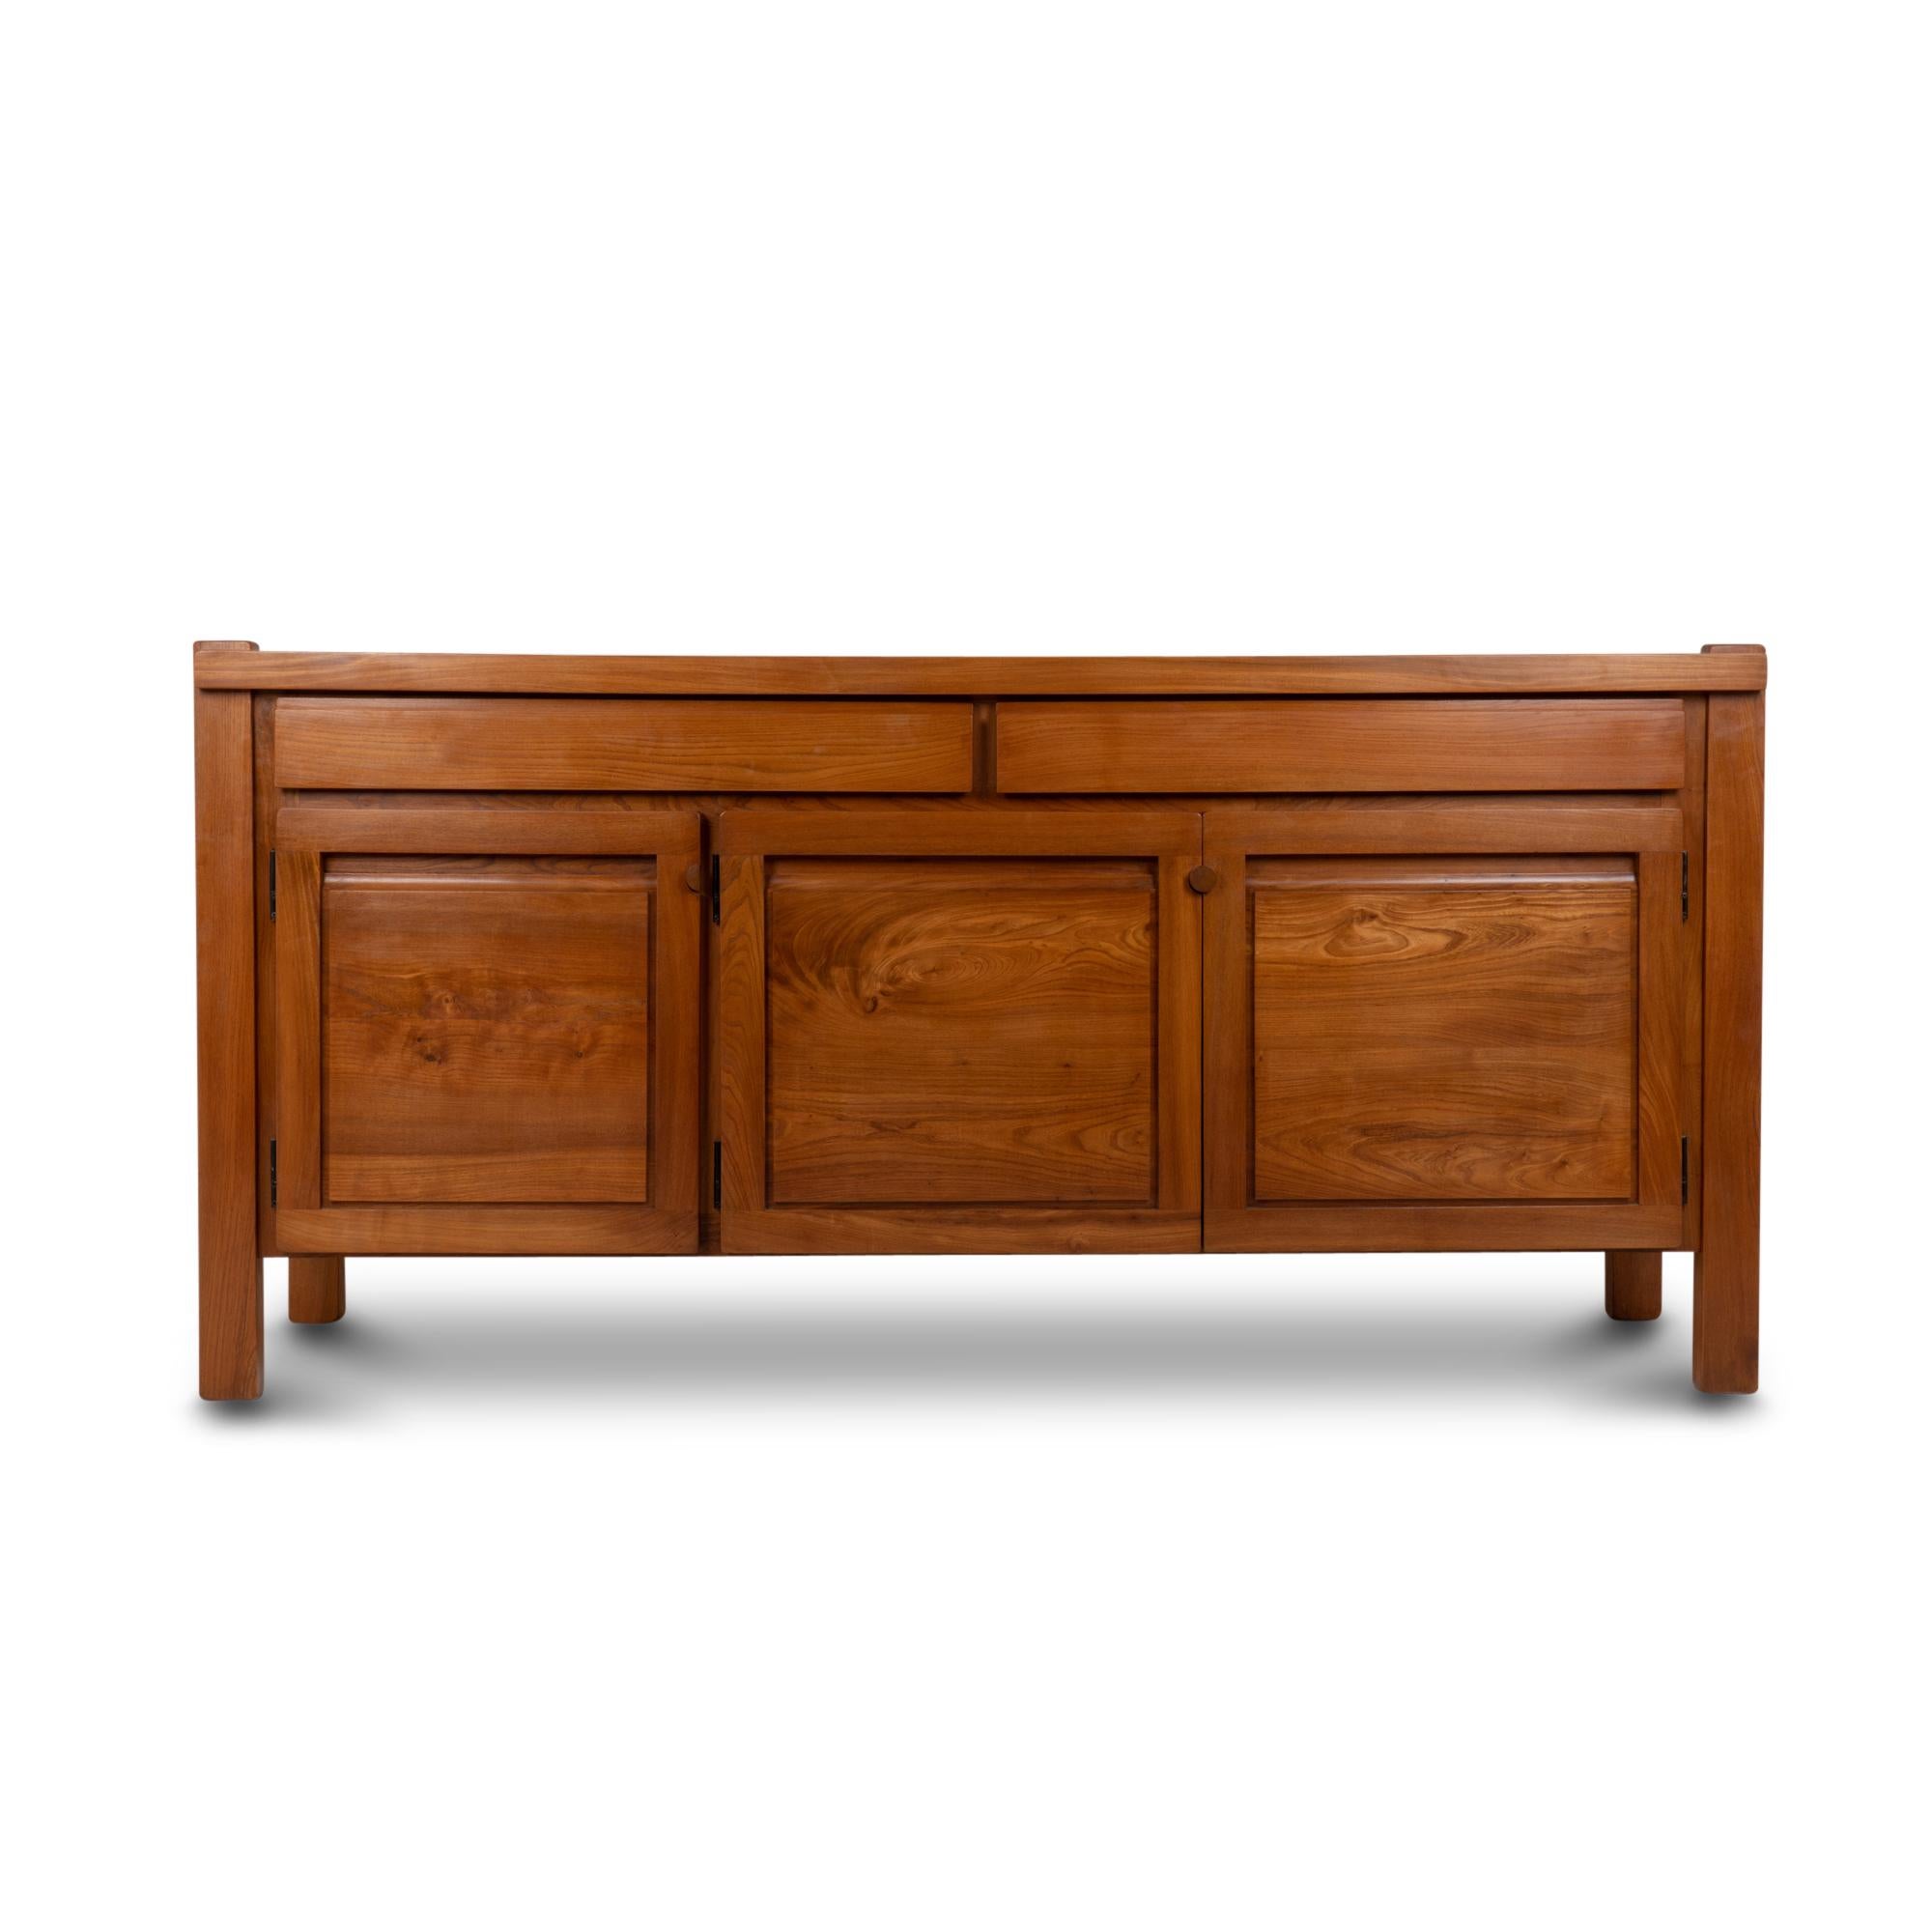 Sideboard in blond solid elm, opening with three doors and two drawers in front. Original compartmentalized cutlery tray in the right drawer. Small circular handles.

French work realized in the 1960s.